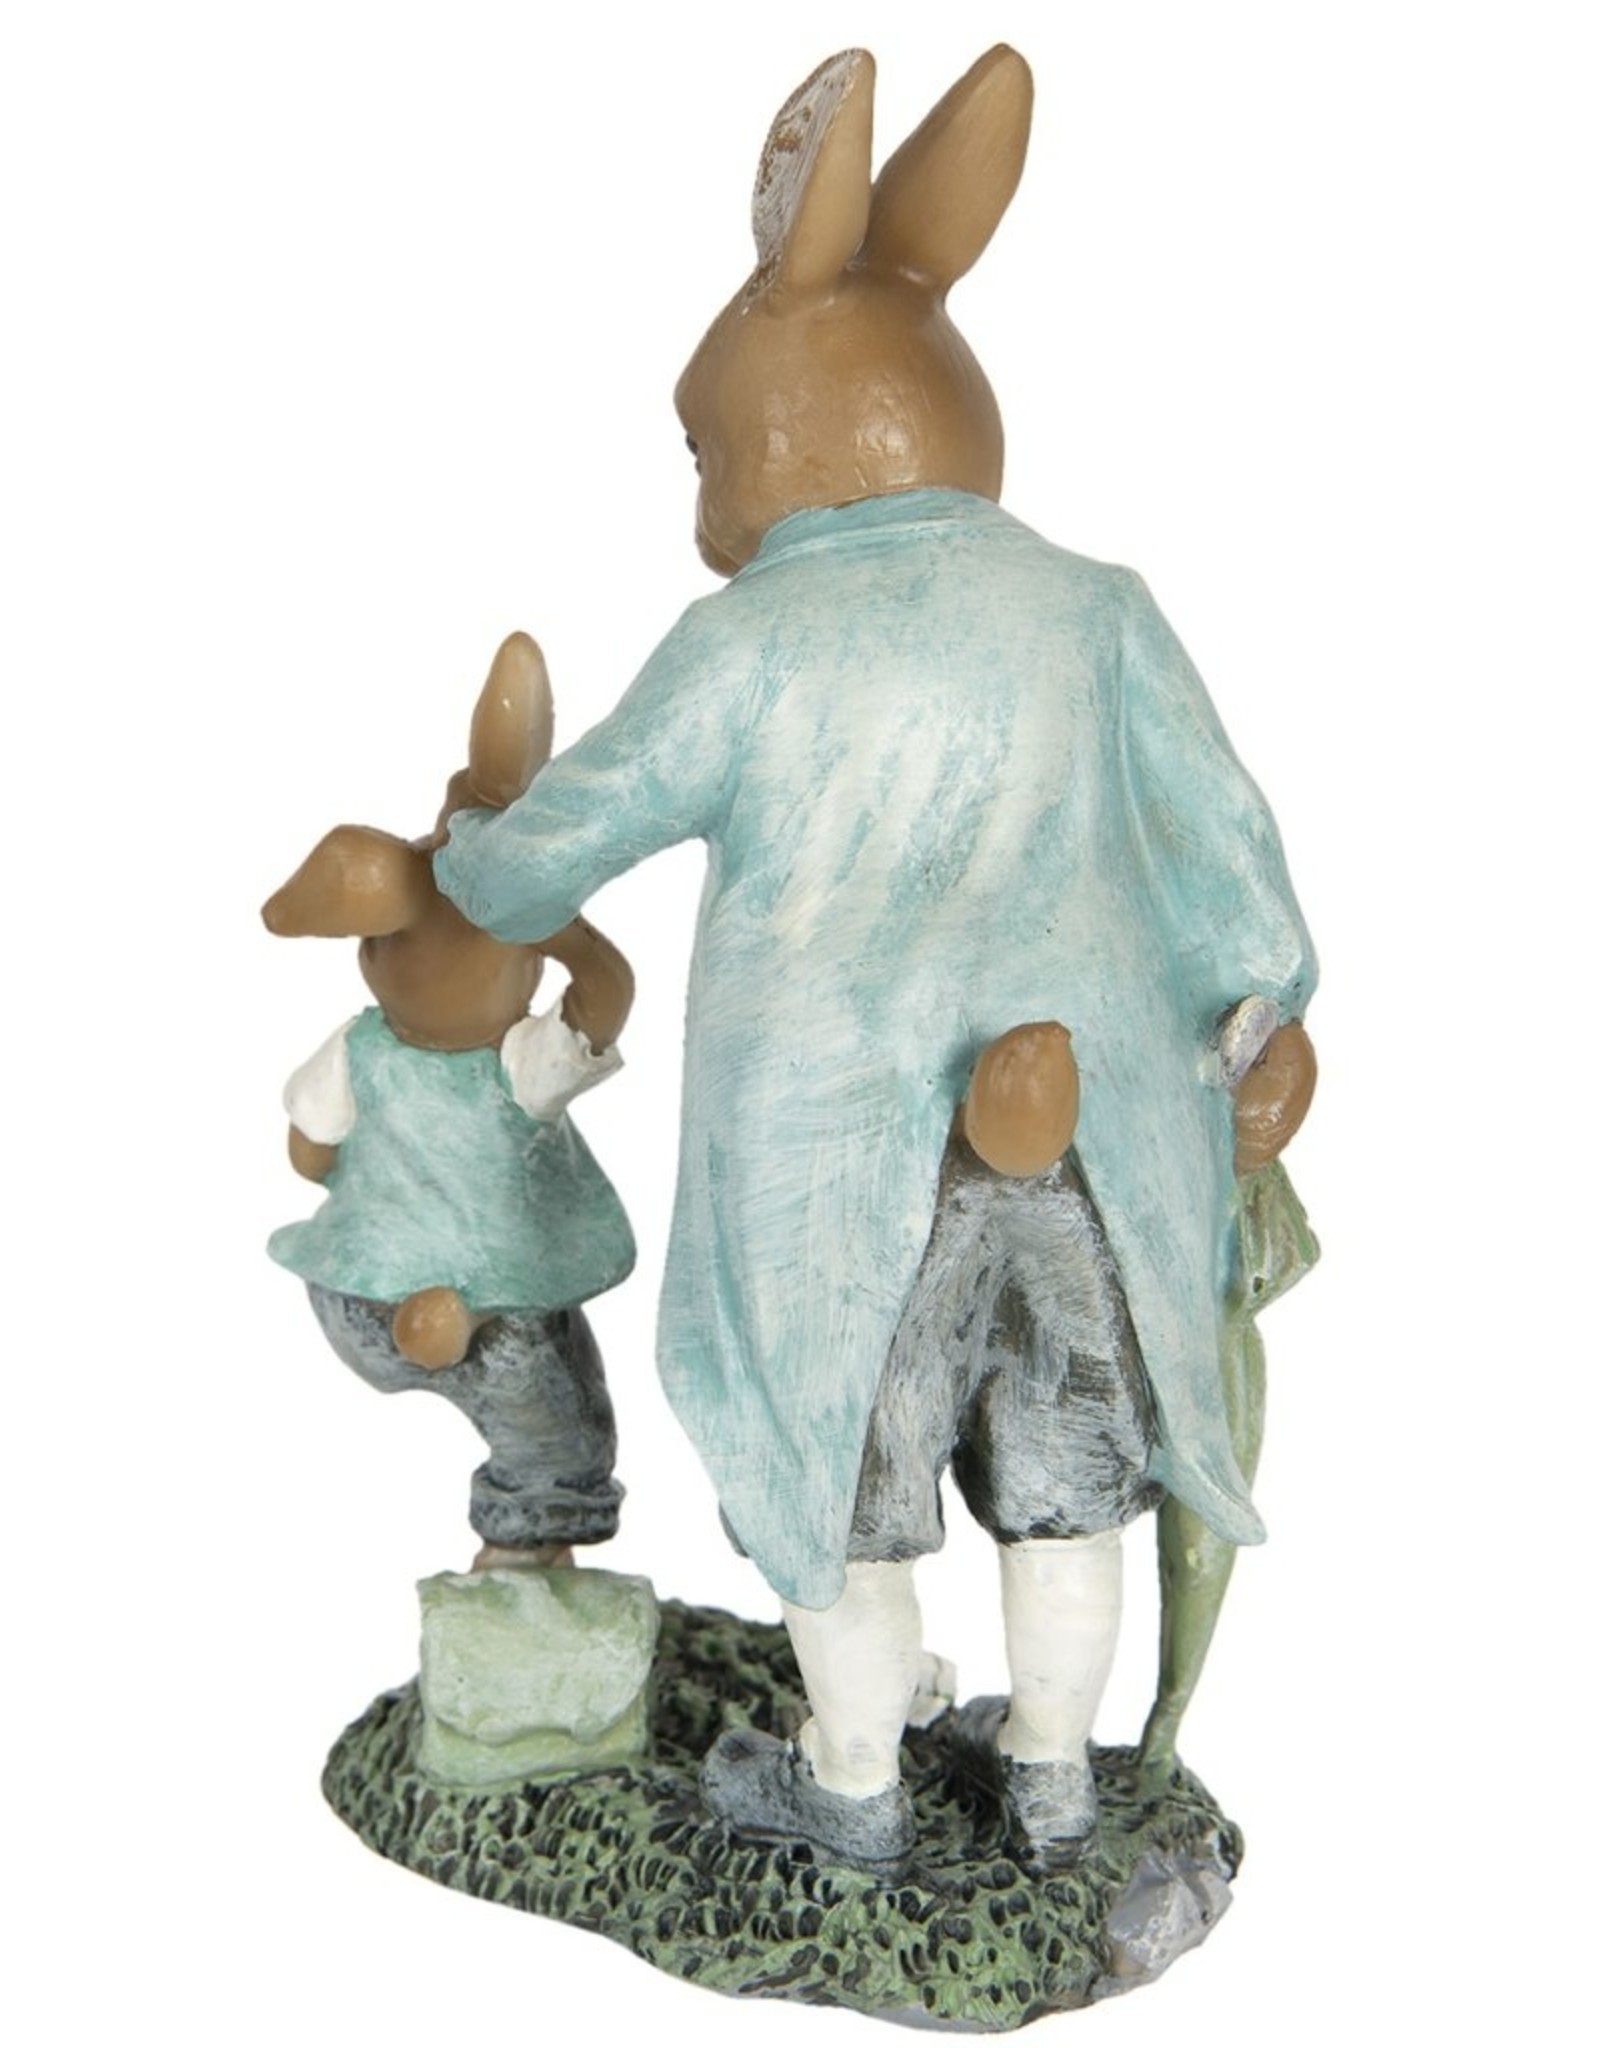 C&E Giftware & Lifestyle - Rabbit Father punishing his son figurine 19cm